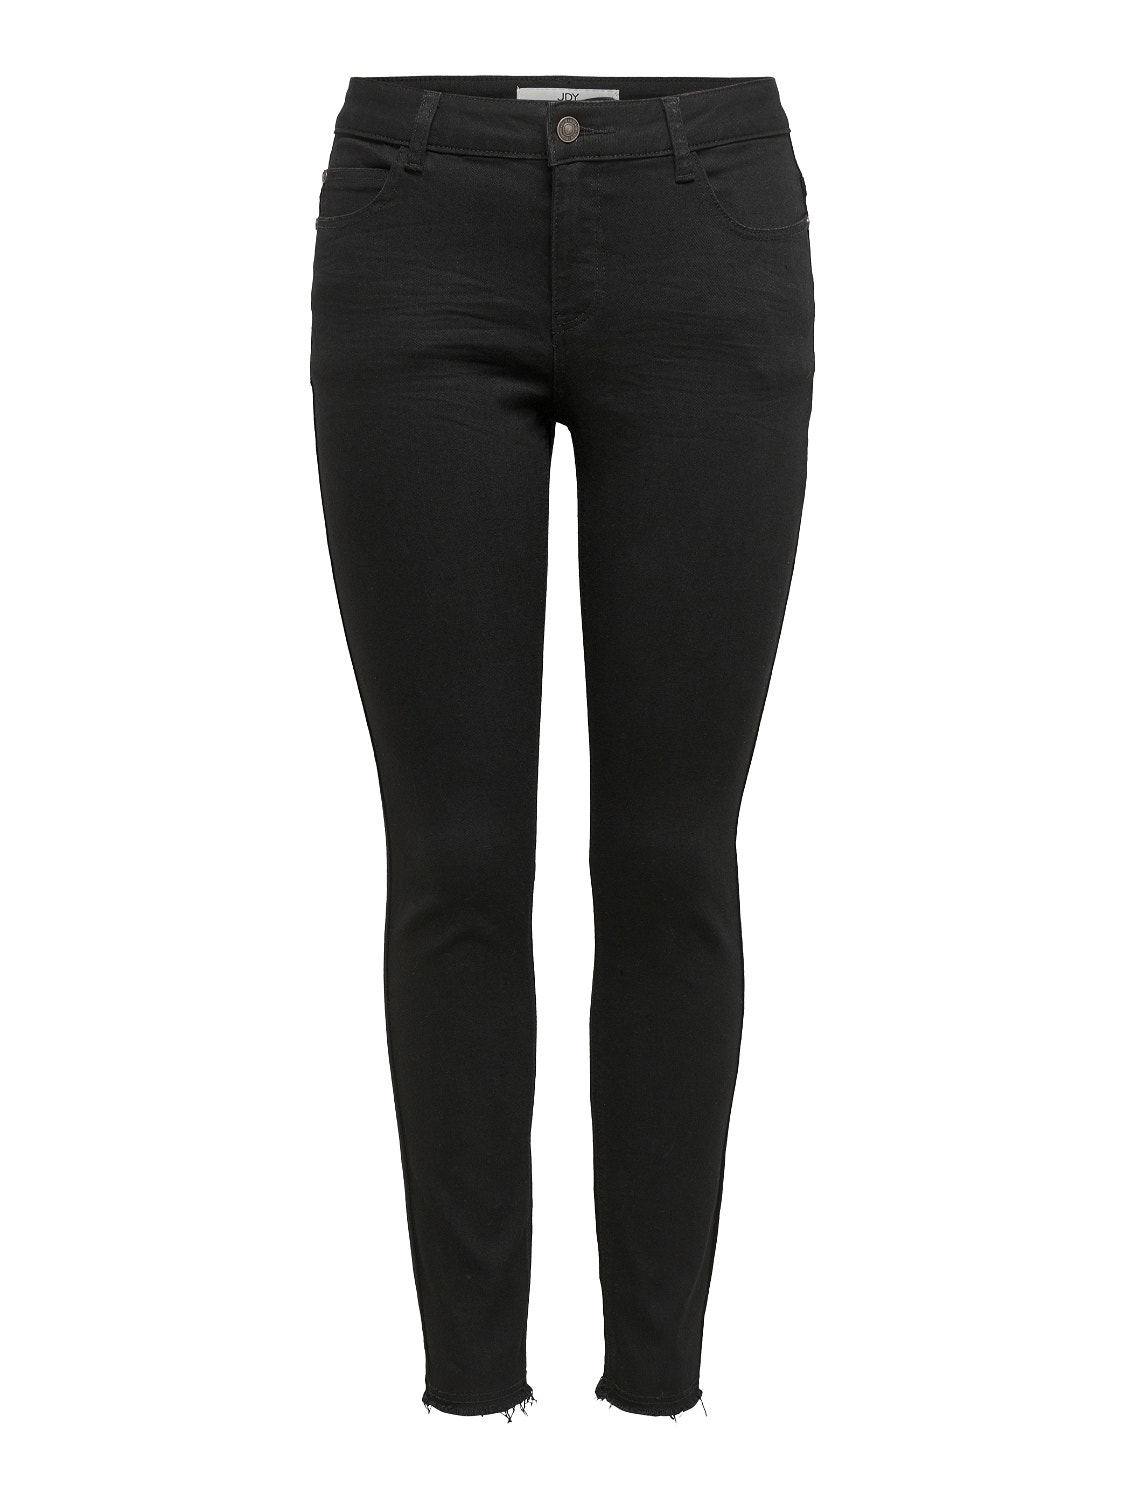 ONLY Skinny Fit Mittlere Taille Jeans -Black Denim - 15208249